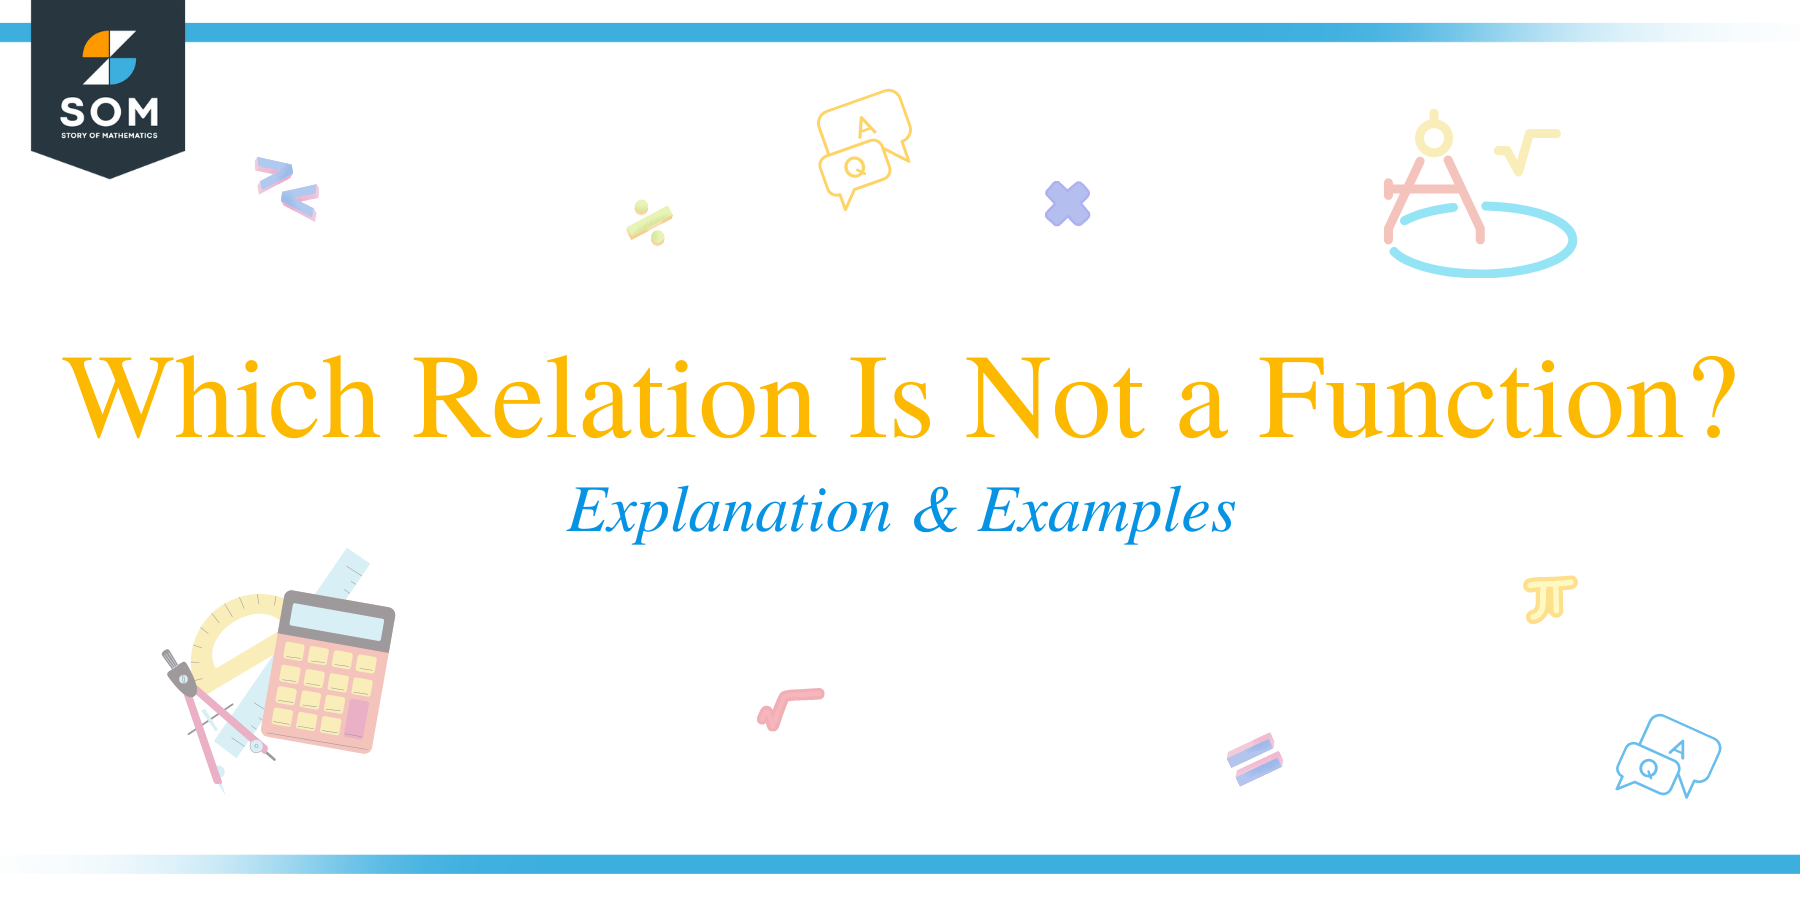 Which Relation Is Not a Function?